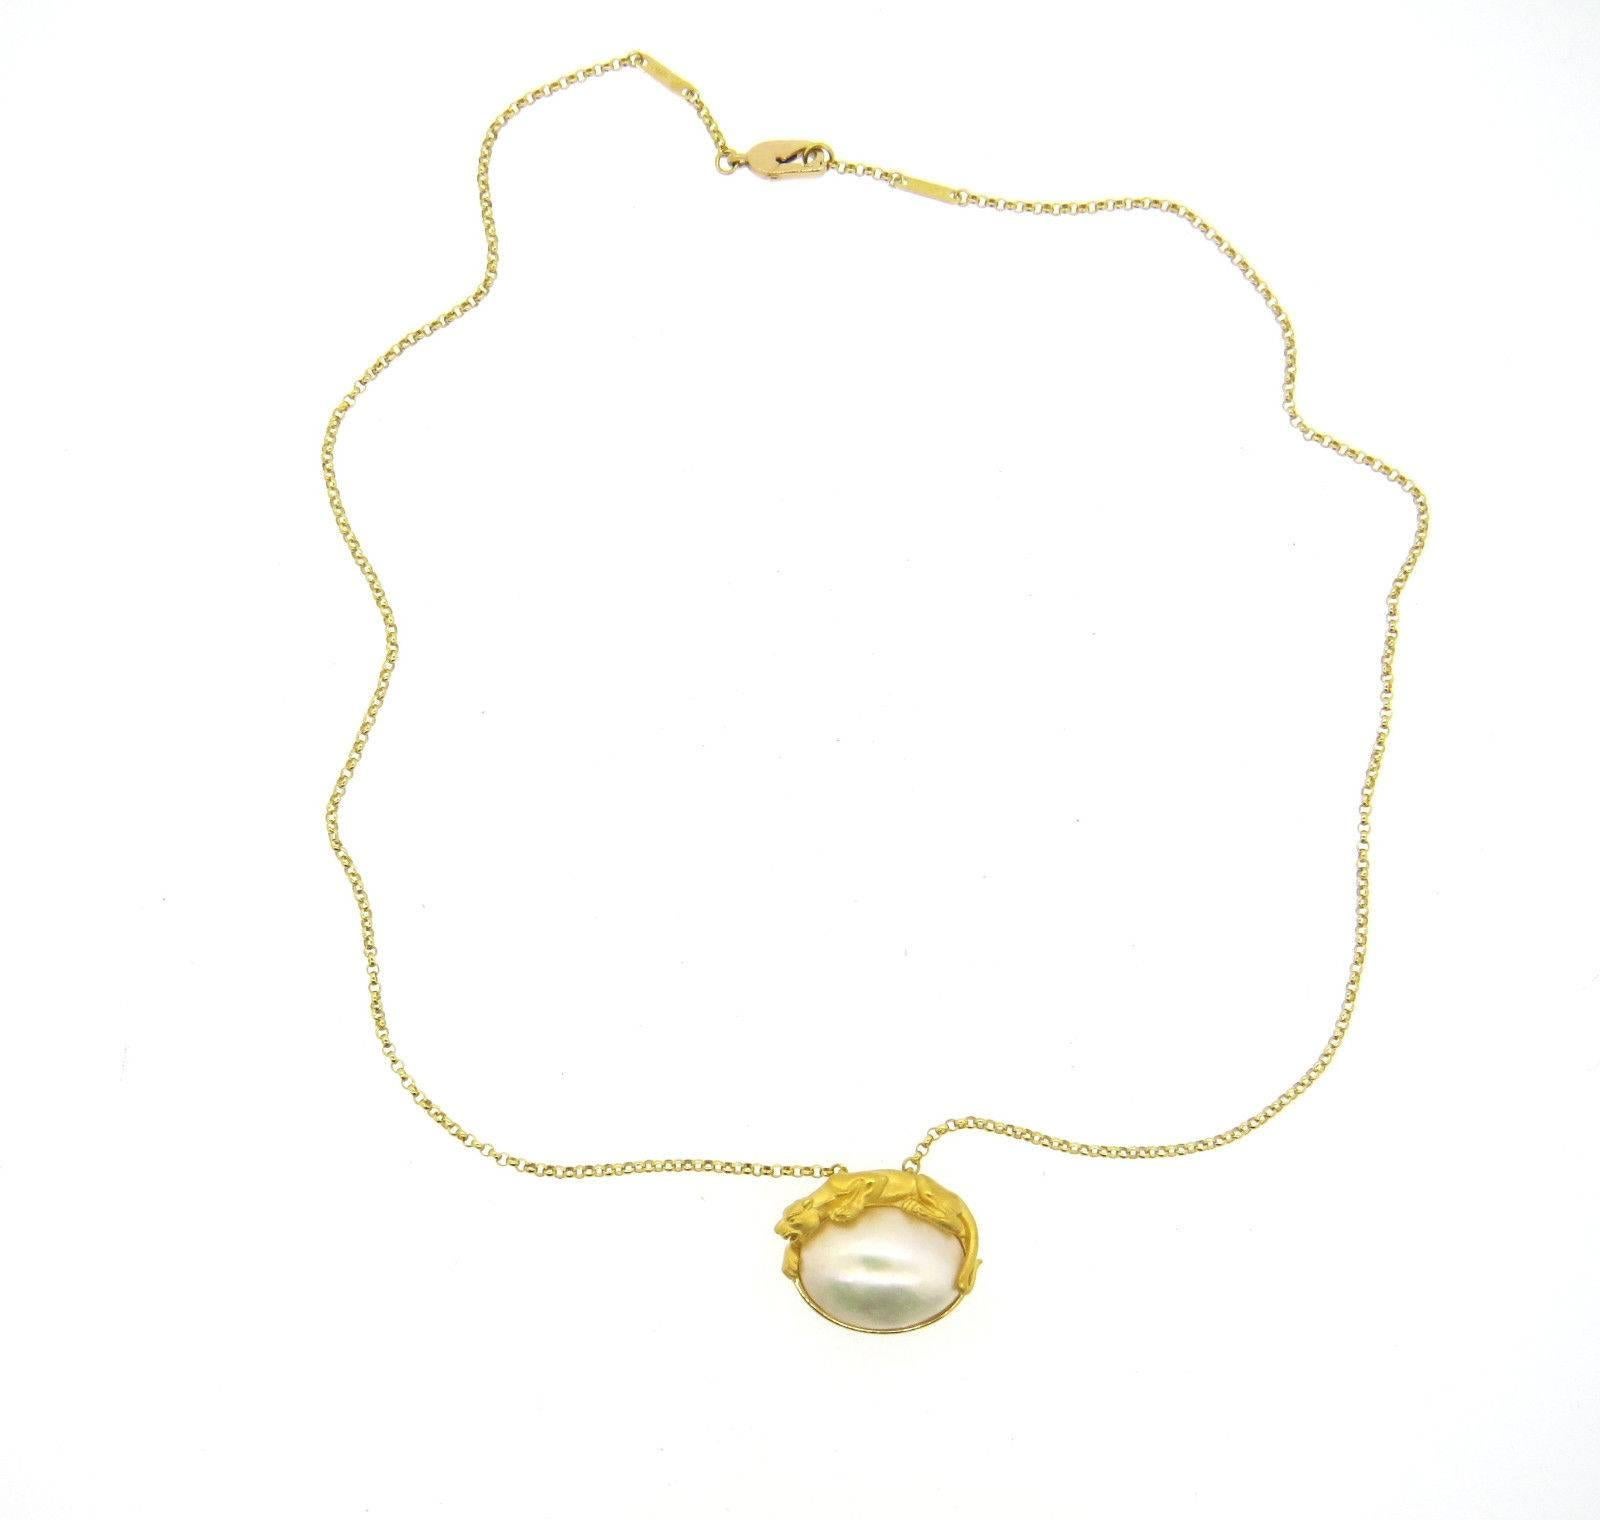 An 18k gold necklace, crafted by Carrera Y Carrera, featuring panther pendant, holding an 18.1mm x 13.3mm mabe pearl. Necklace is 18